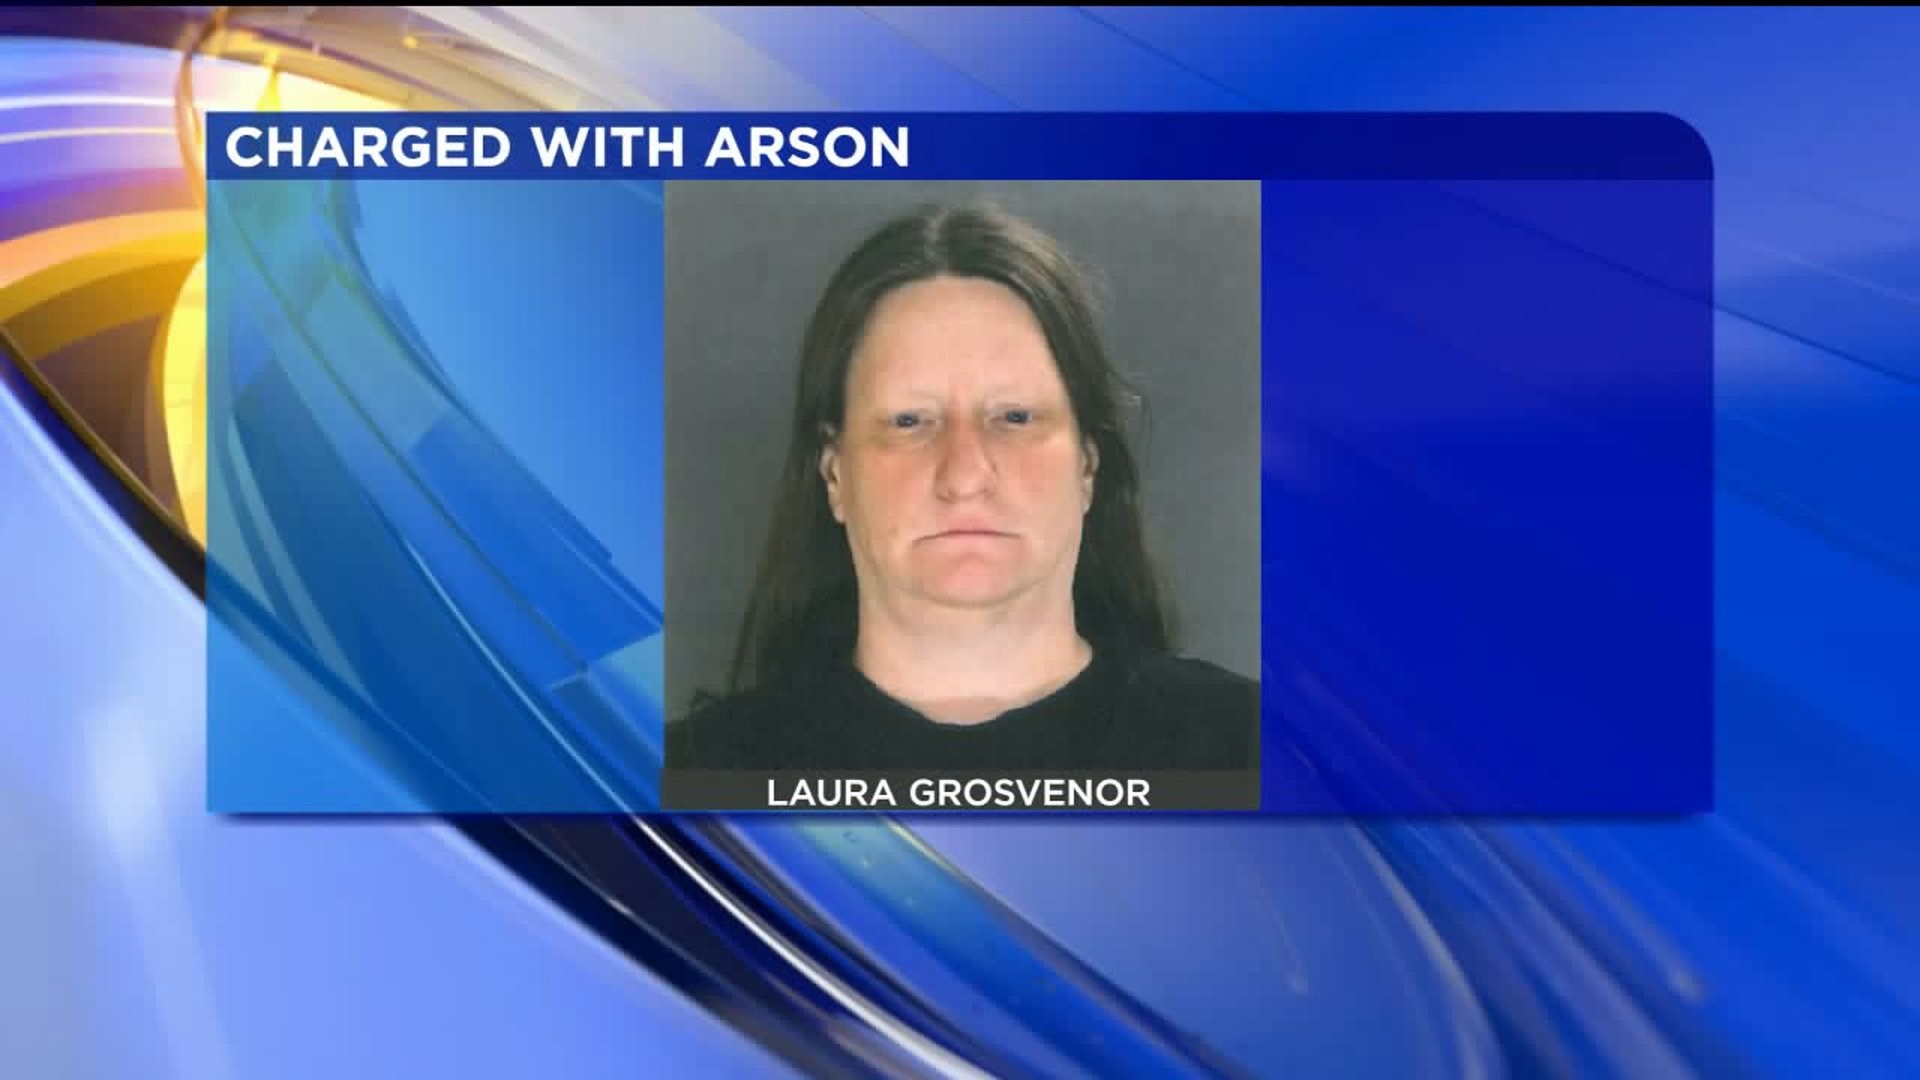 Arson Suspect Claims She Suffers From Pyromania and Ran Out of Medicine